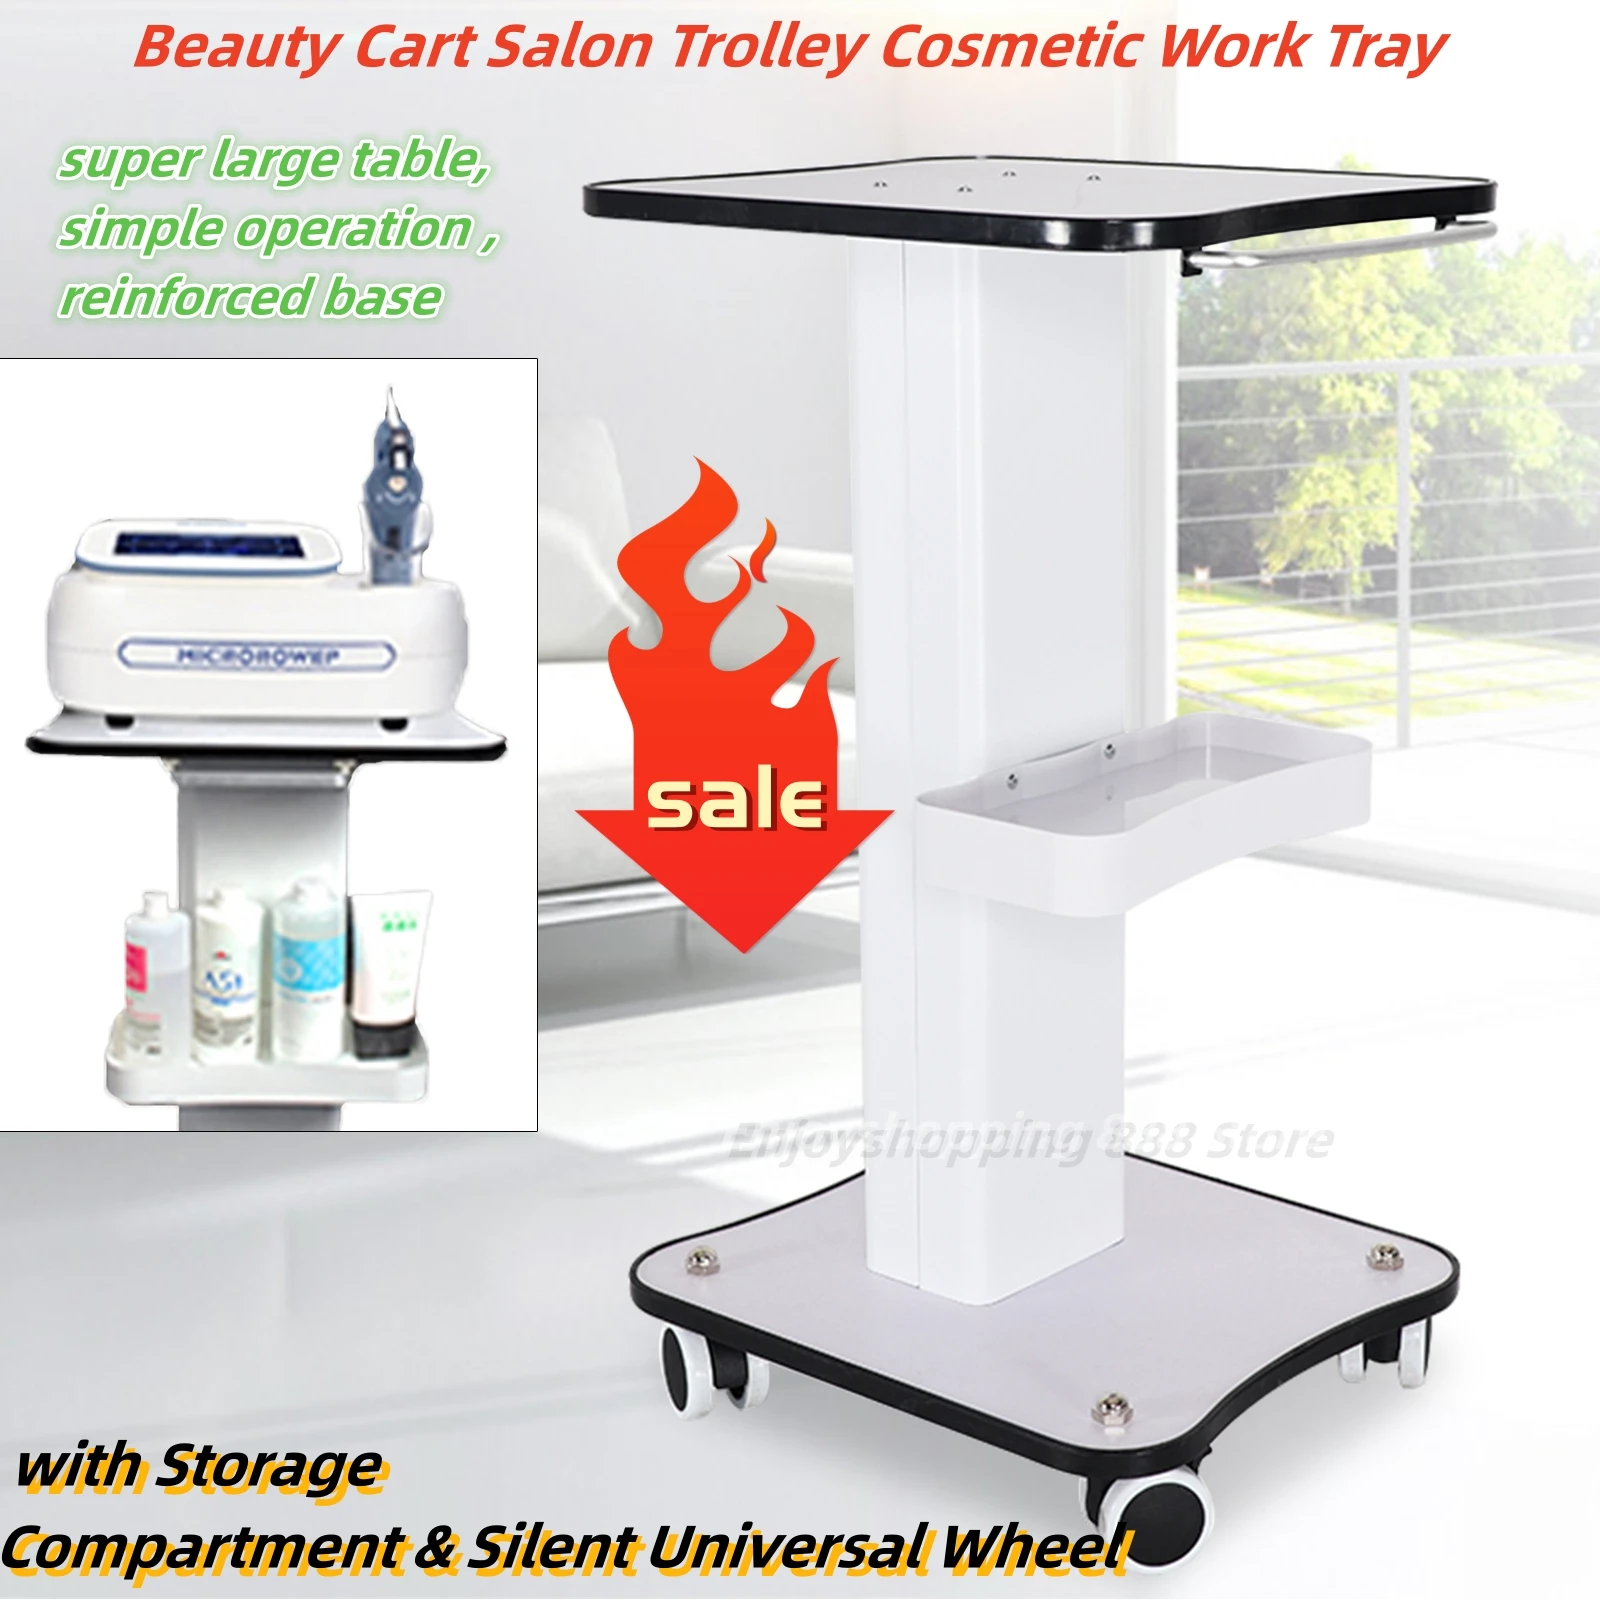 Beauty Cart Salon Trolley Cosmetic Work Tray with Storage Compartment & Silent Universal Wheel suitable for samsonite v97 suitcase universal wheel suitcase silent wheel wear resistant wheel hub trolley box rolling pulley